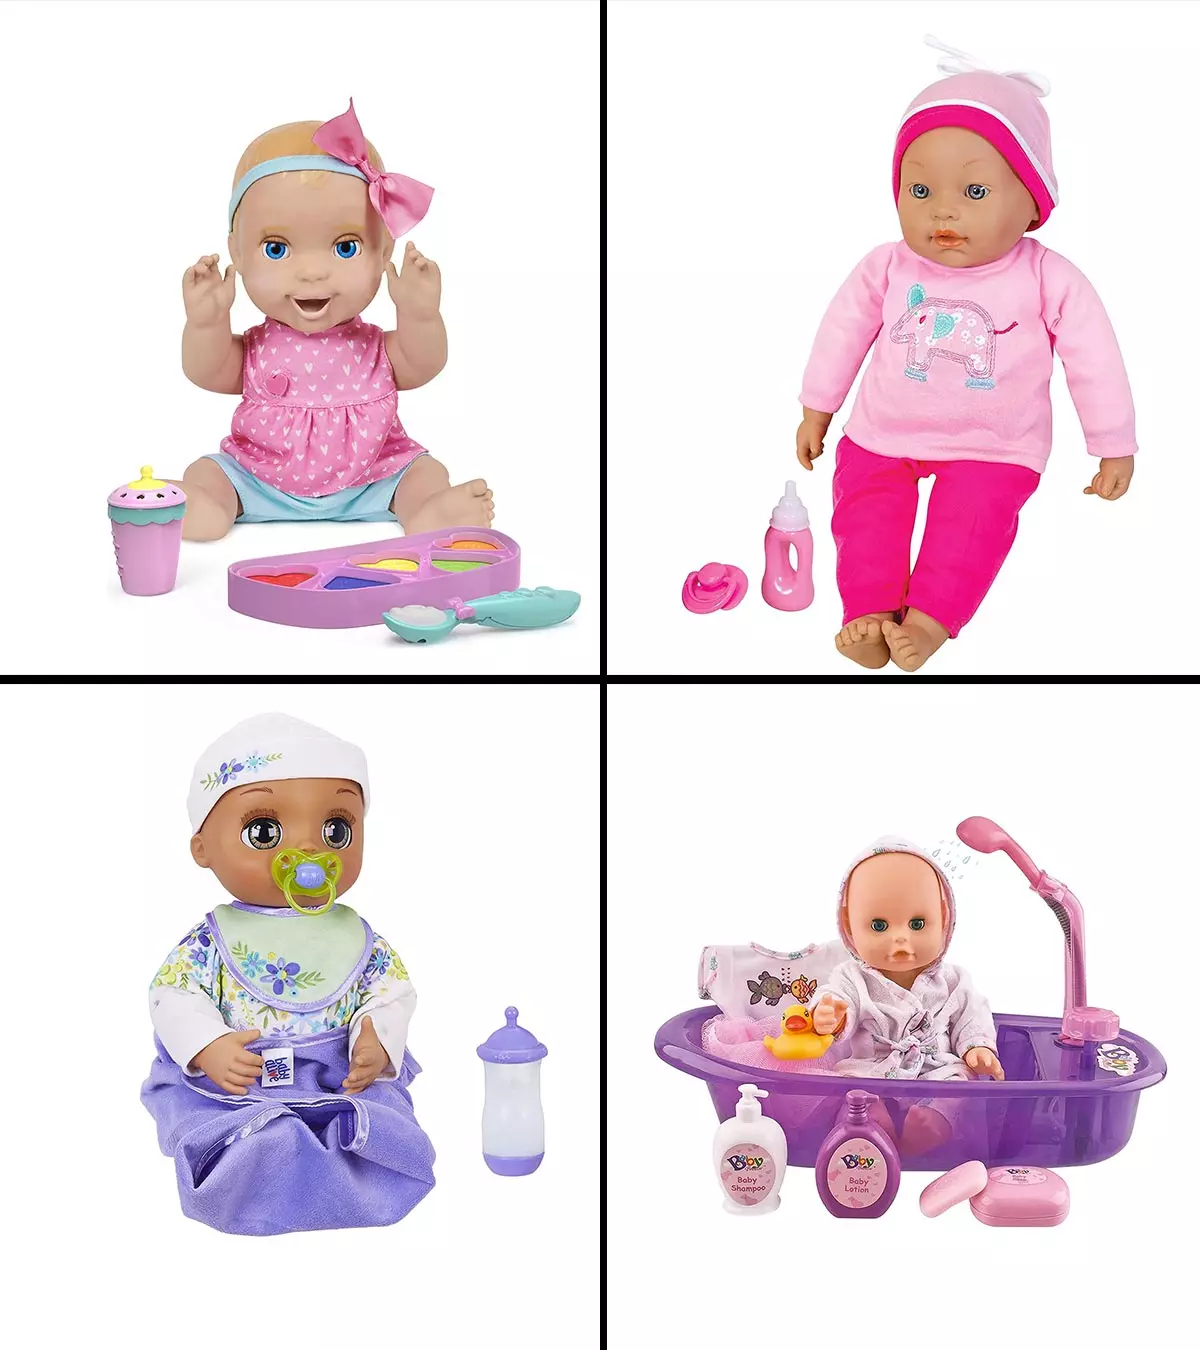 Inspire your child's imagination and social skills with these lifelike baby dolls.